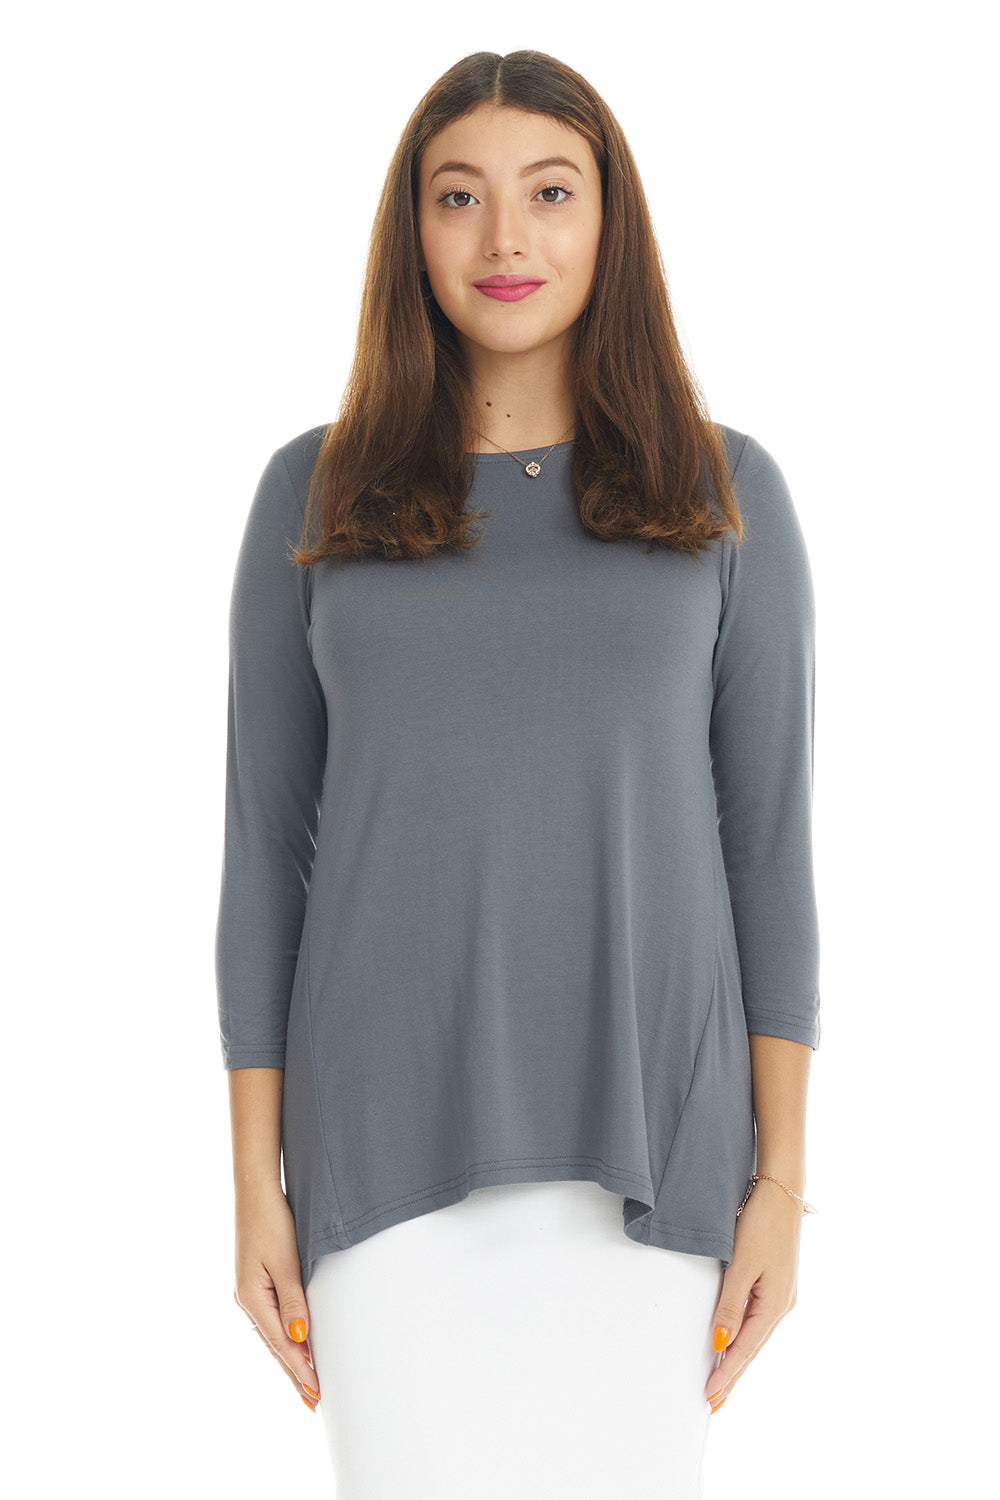 gray basic top to wear with jean skirts